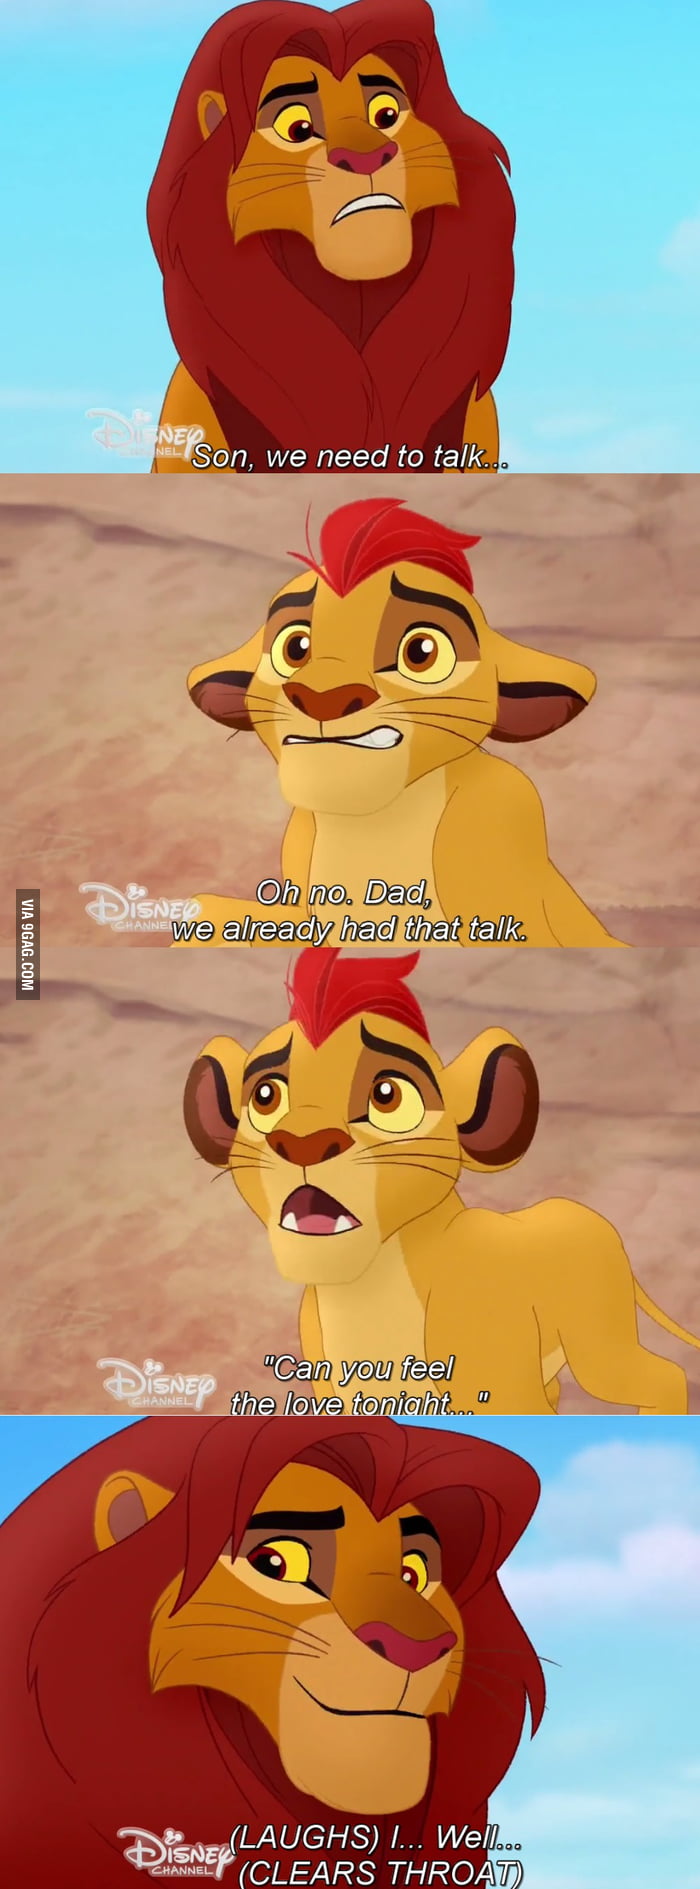 Simba Talking About His Sexy Time With Nala 9gag